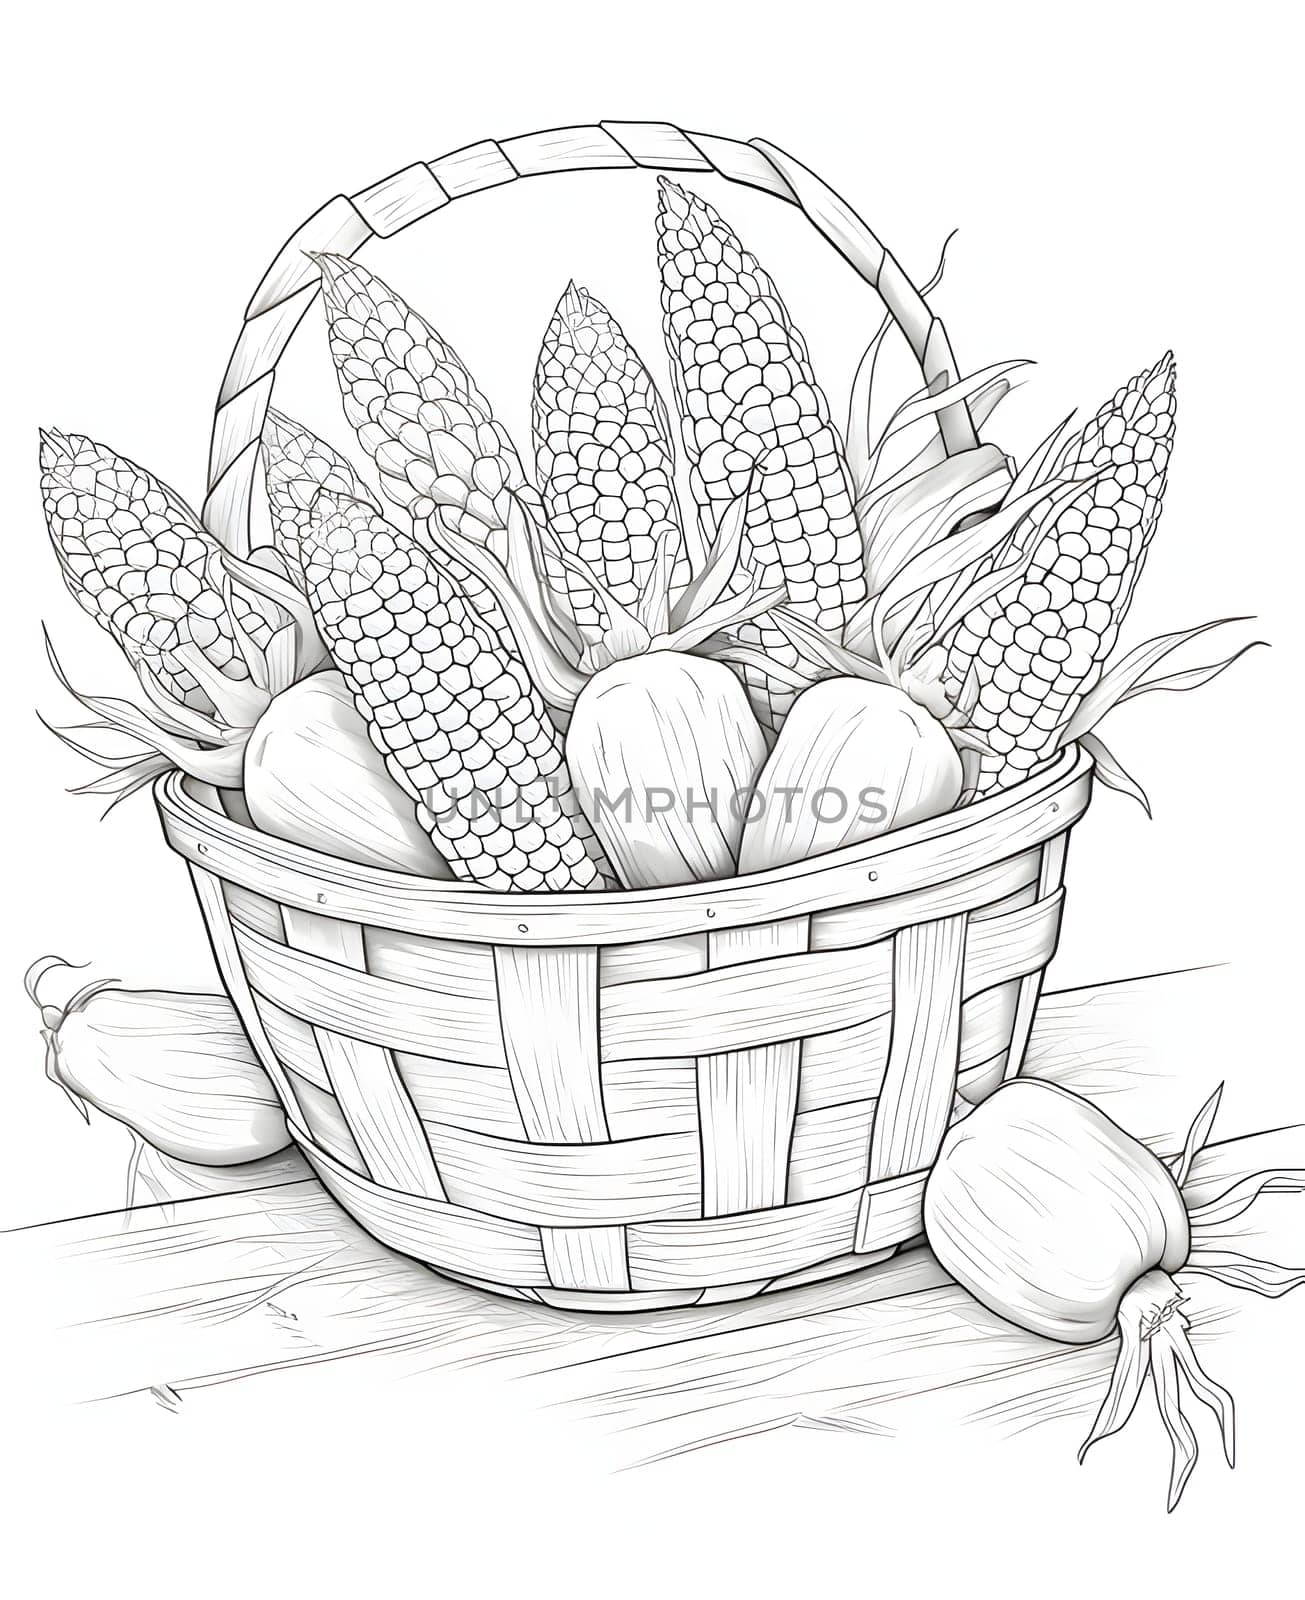 Black and White coloring book wicker basket, full of vegetables, fruits leaves, corn cobs. Corn as a dish of thanksgiving for the harvest, a picture on a white isolated background. by ThemesS